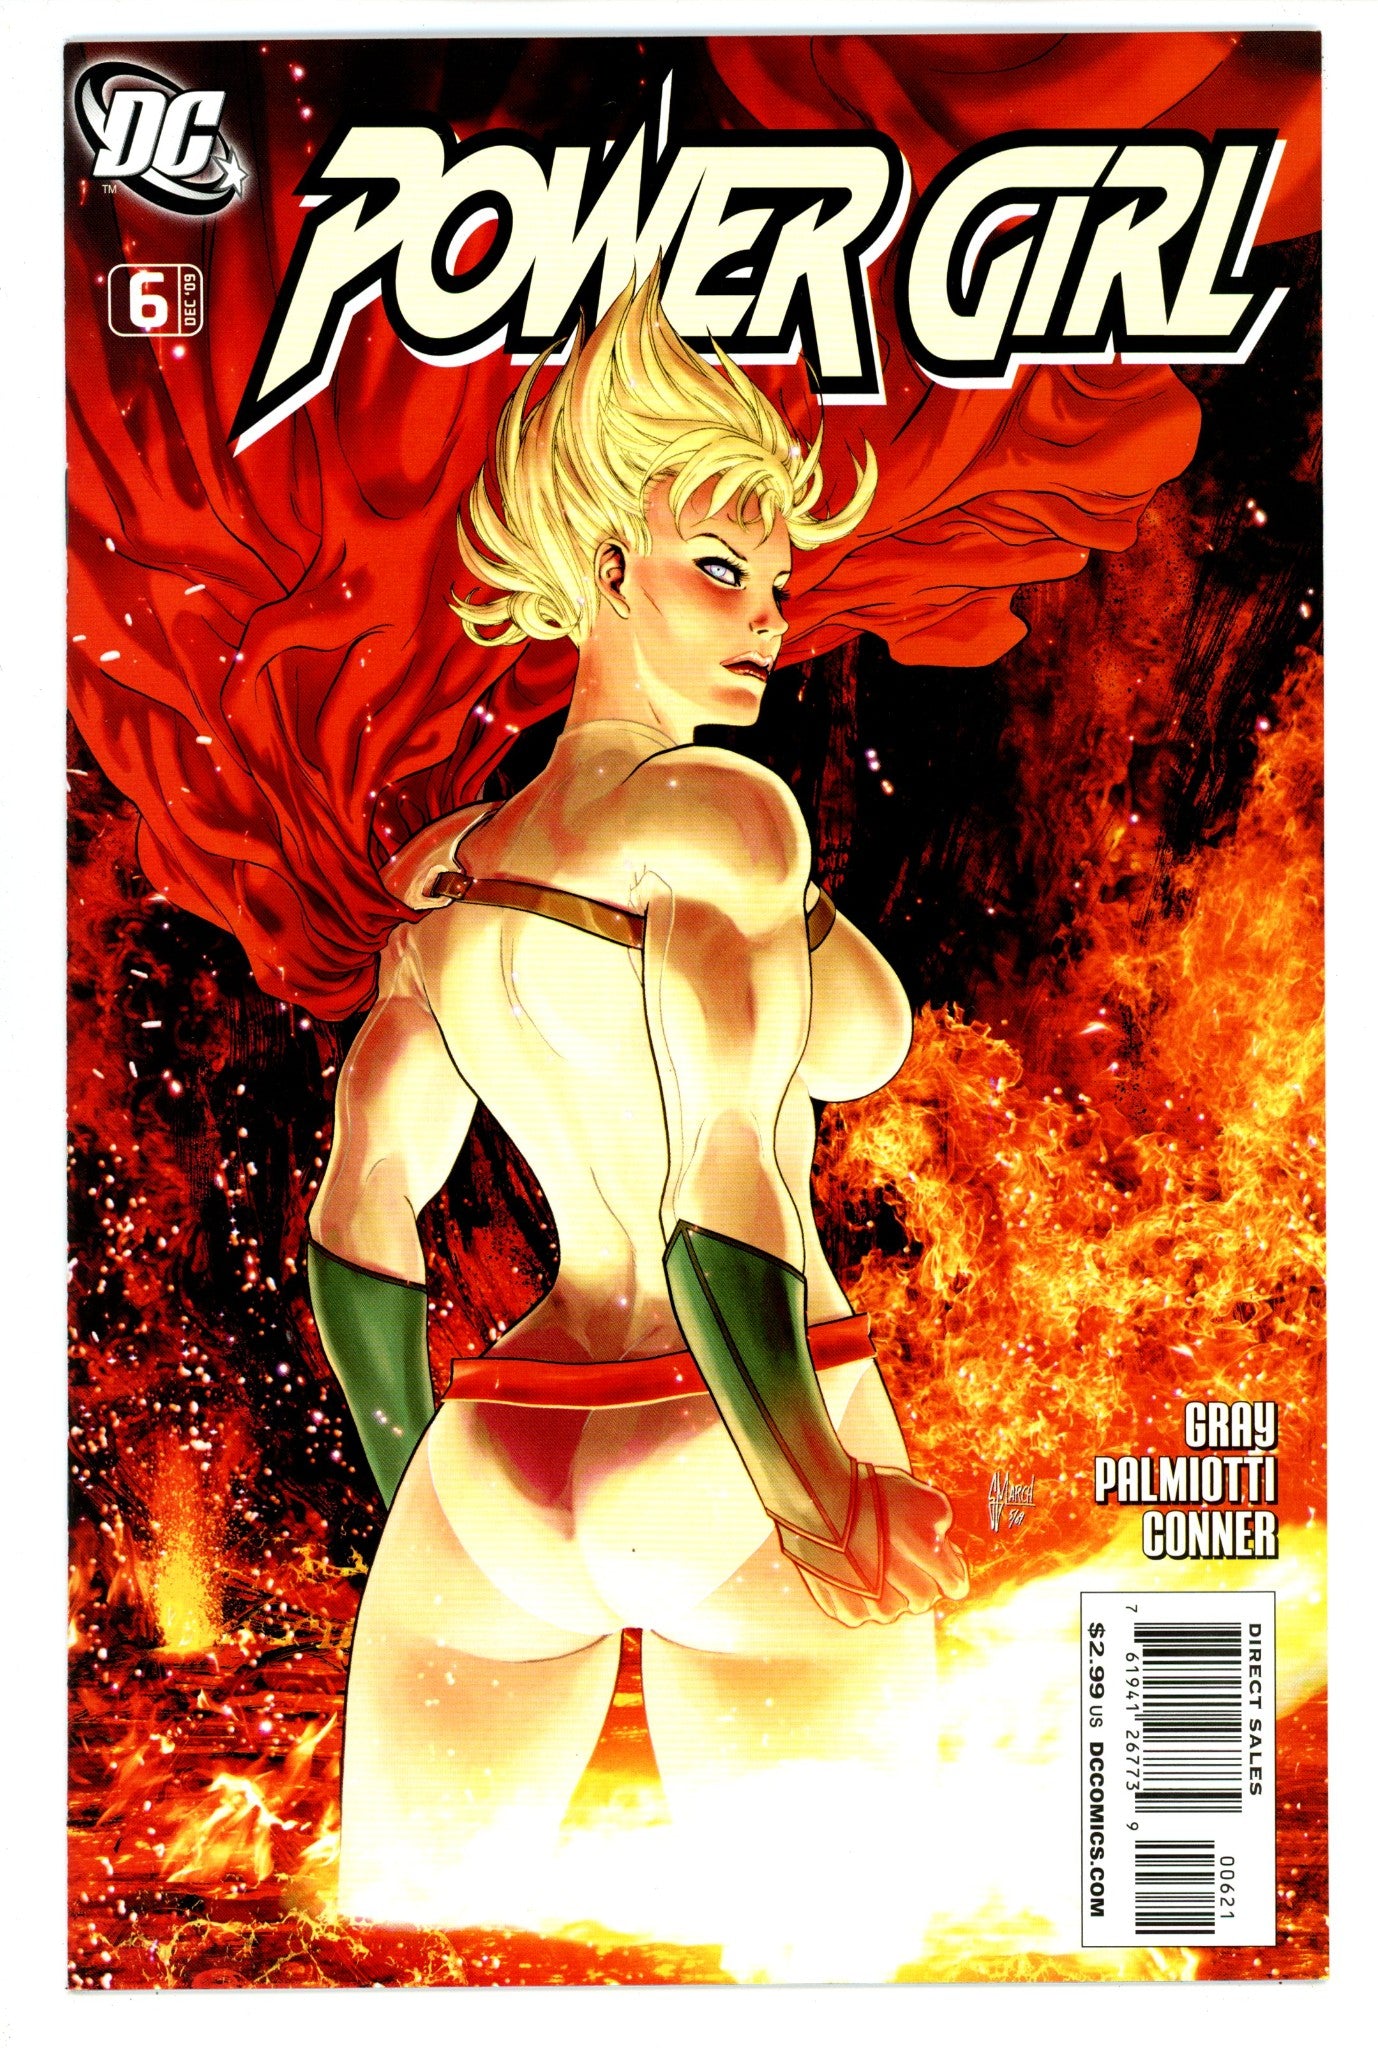 Power Girl Vol 2 6 VF/NM (9.0) (2009) March Incentive Variant 